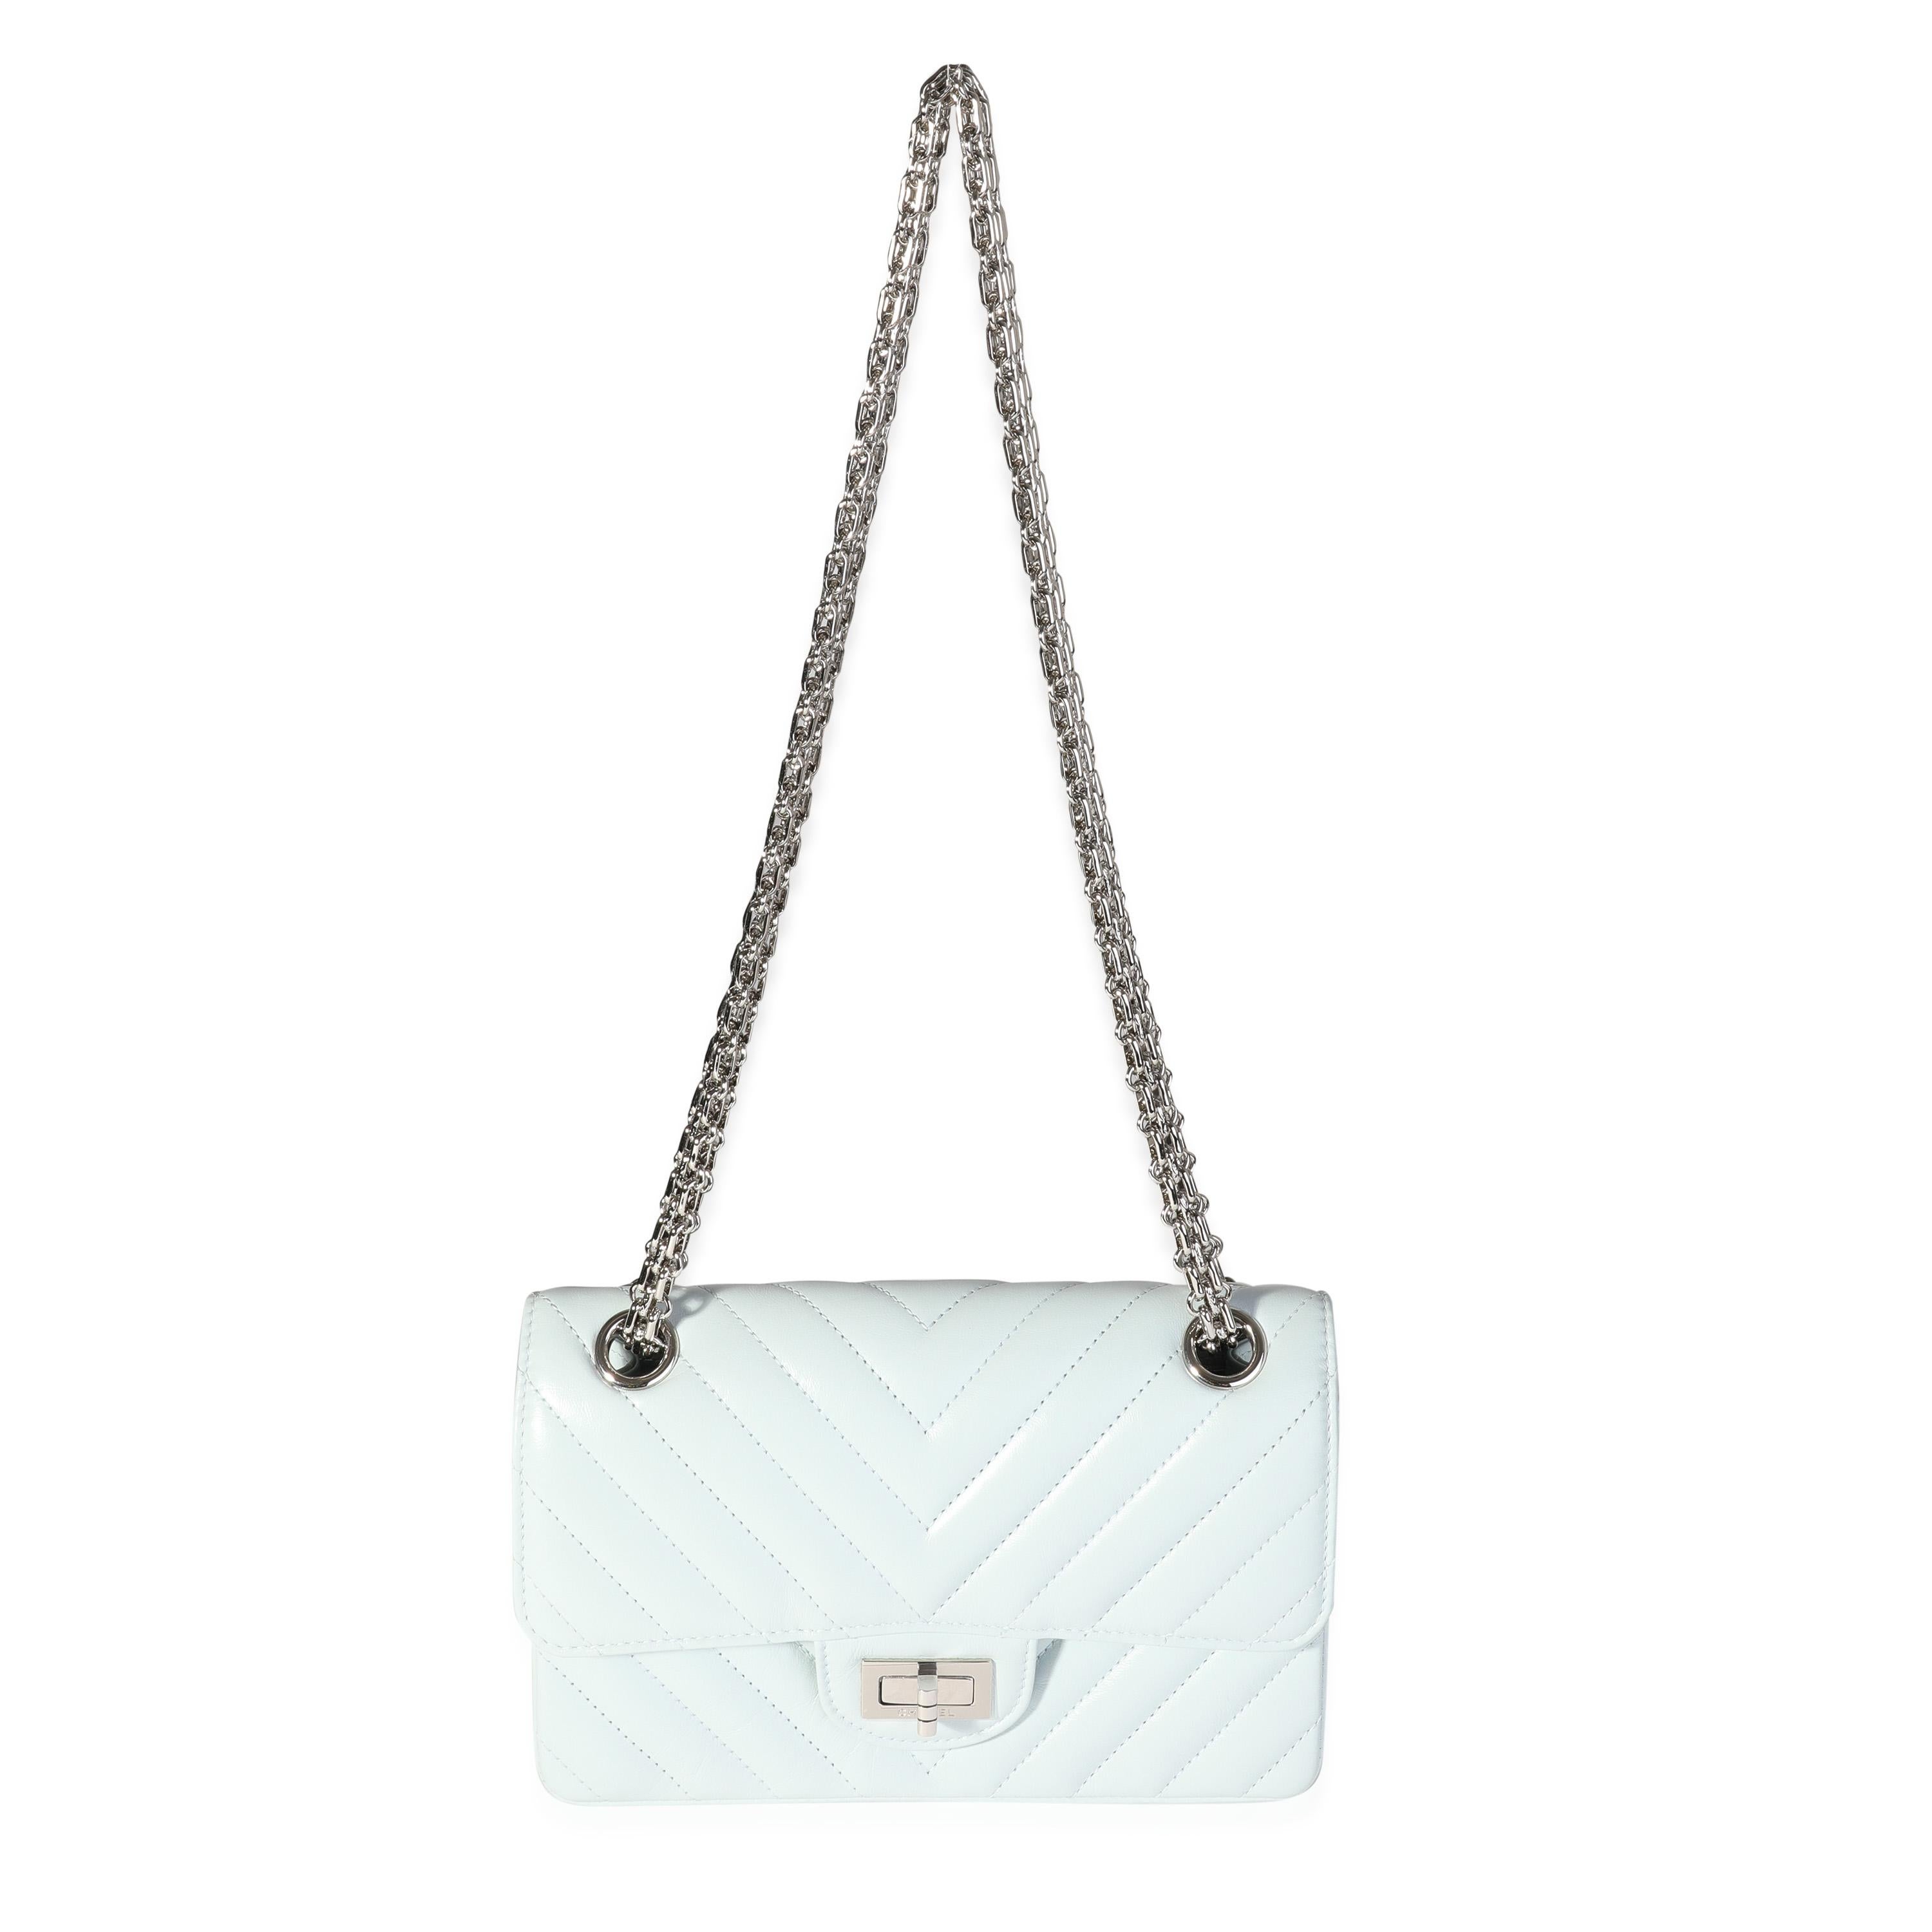 Listing Title: Chanel Light Blue Chevron Quilted Aged Calfskin Mini 2.55 Reissue Flap Bag
SKU: 118588
Condition: Pre-owned (3000)
Handbag Condition: Never Worn
Brand: Chanel
Model: Light Blue Chevron Aged Calfskin Mini 2.55 Reissue Flap Bag
Origin